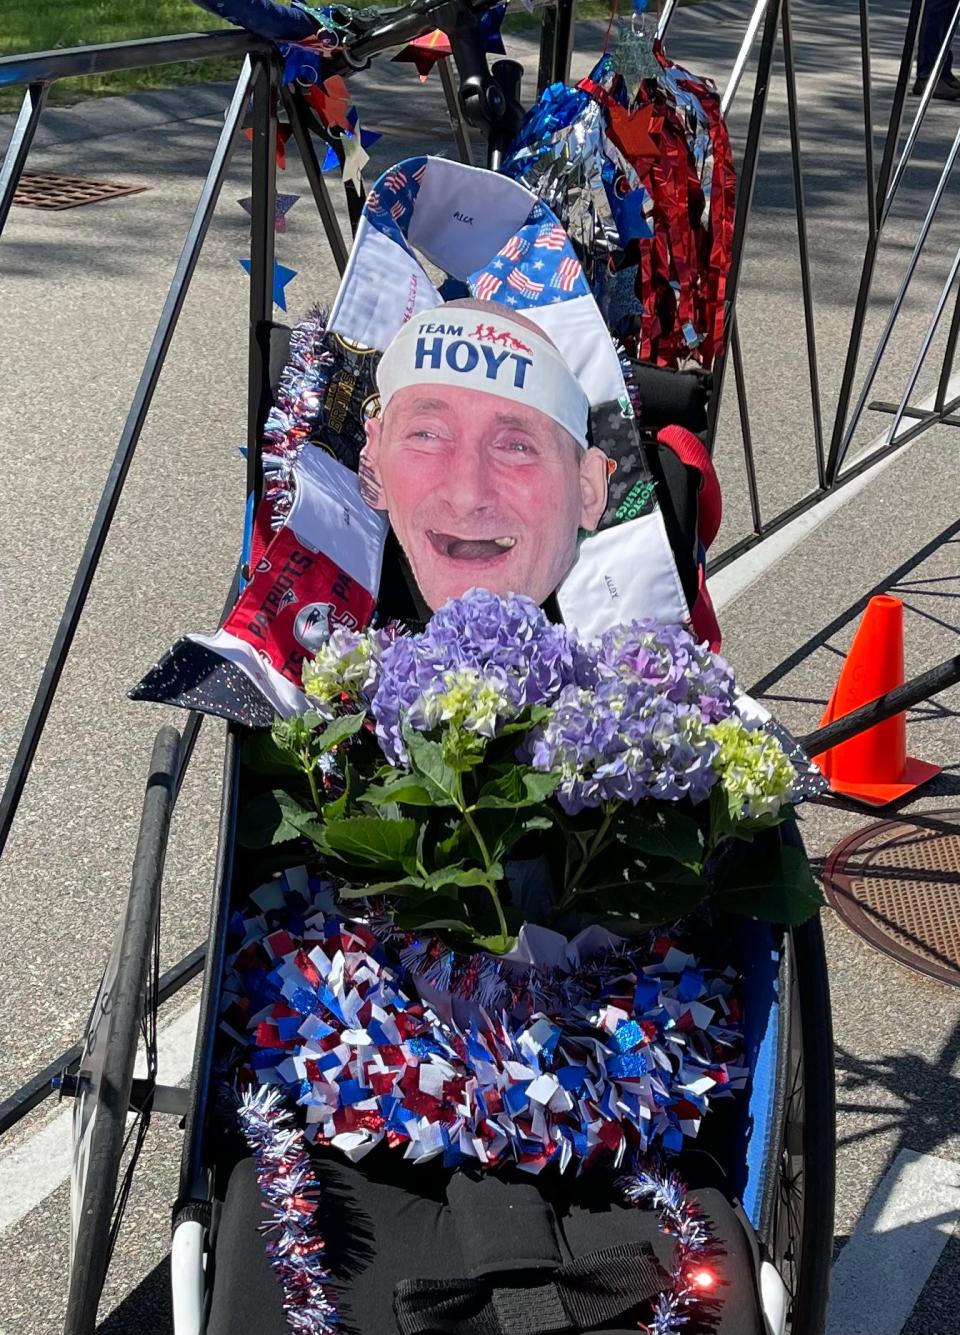 A likeness of Rick Hoyt with a bouquet of hydrangeas was posted in a racing chair at the finish line of Saturday's Dick Hoyt Memorial Yes You Can road race in Hopkinton. Rick died on May 22.